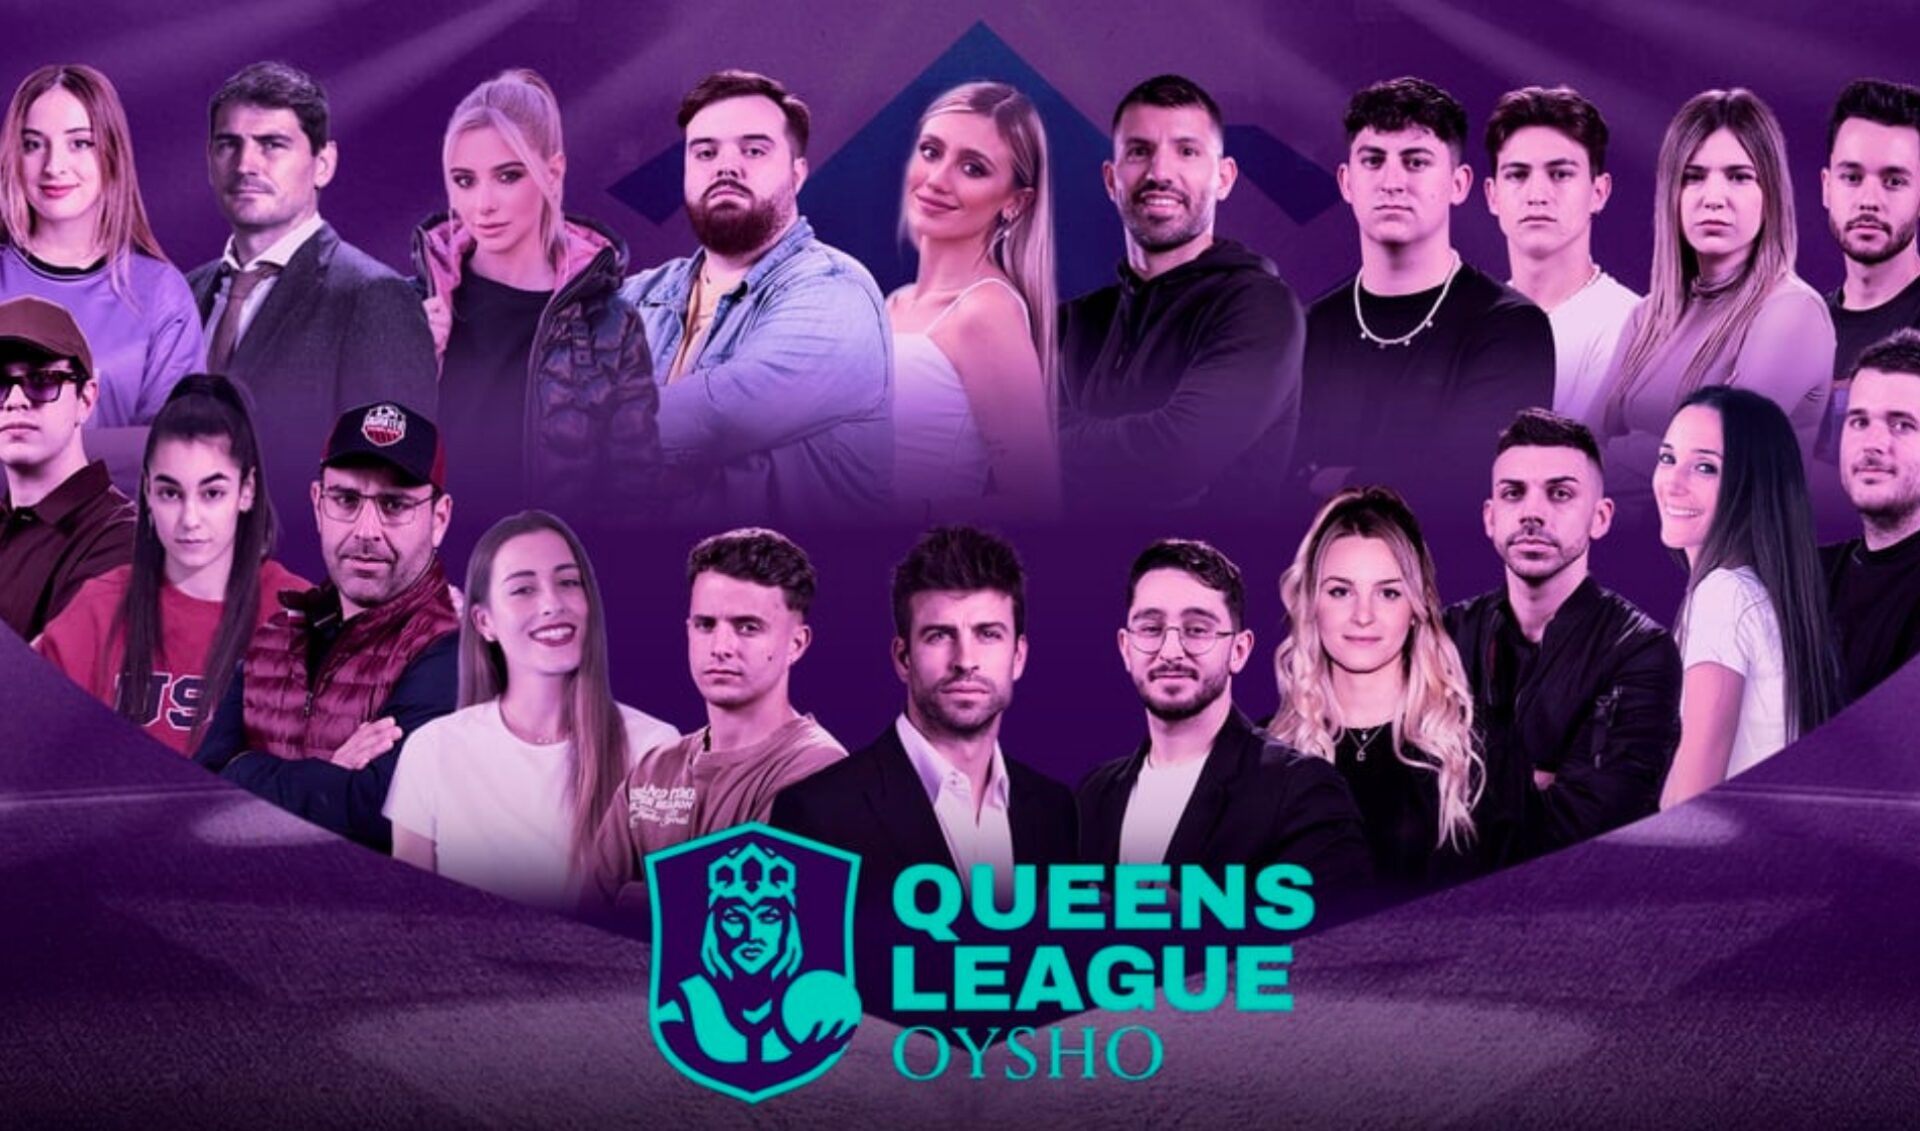 The streamer-led Kings League drew 90,000 fans. Now the Queens are taking the pitch.